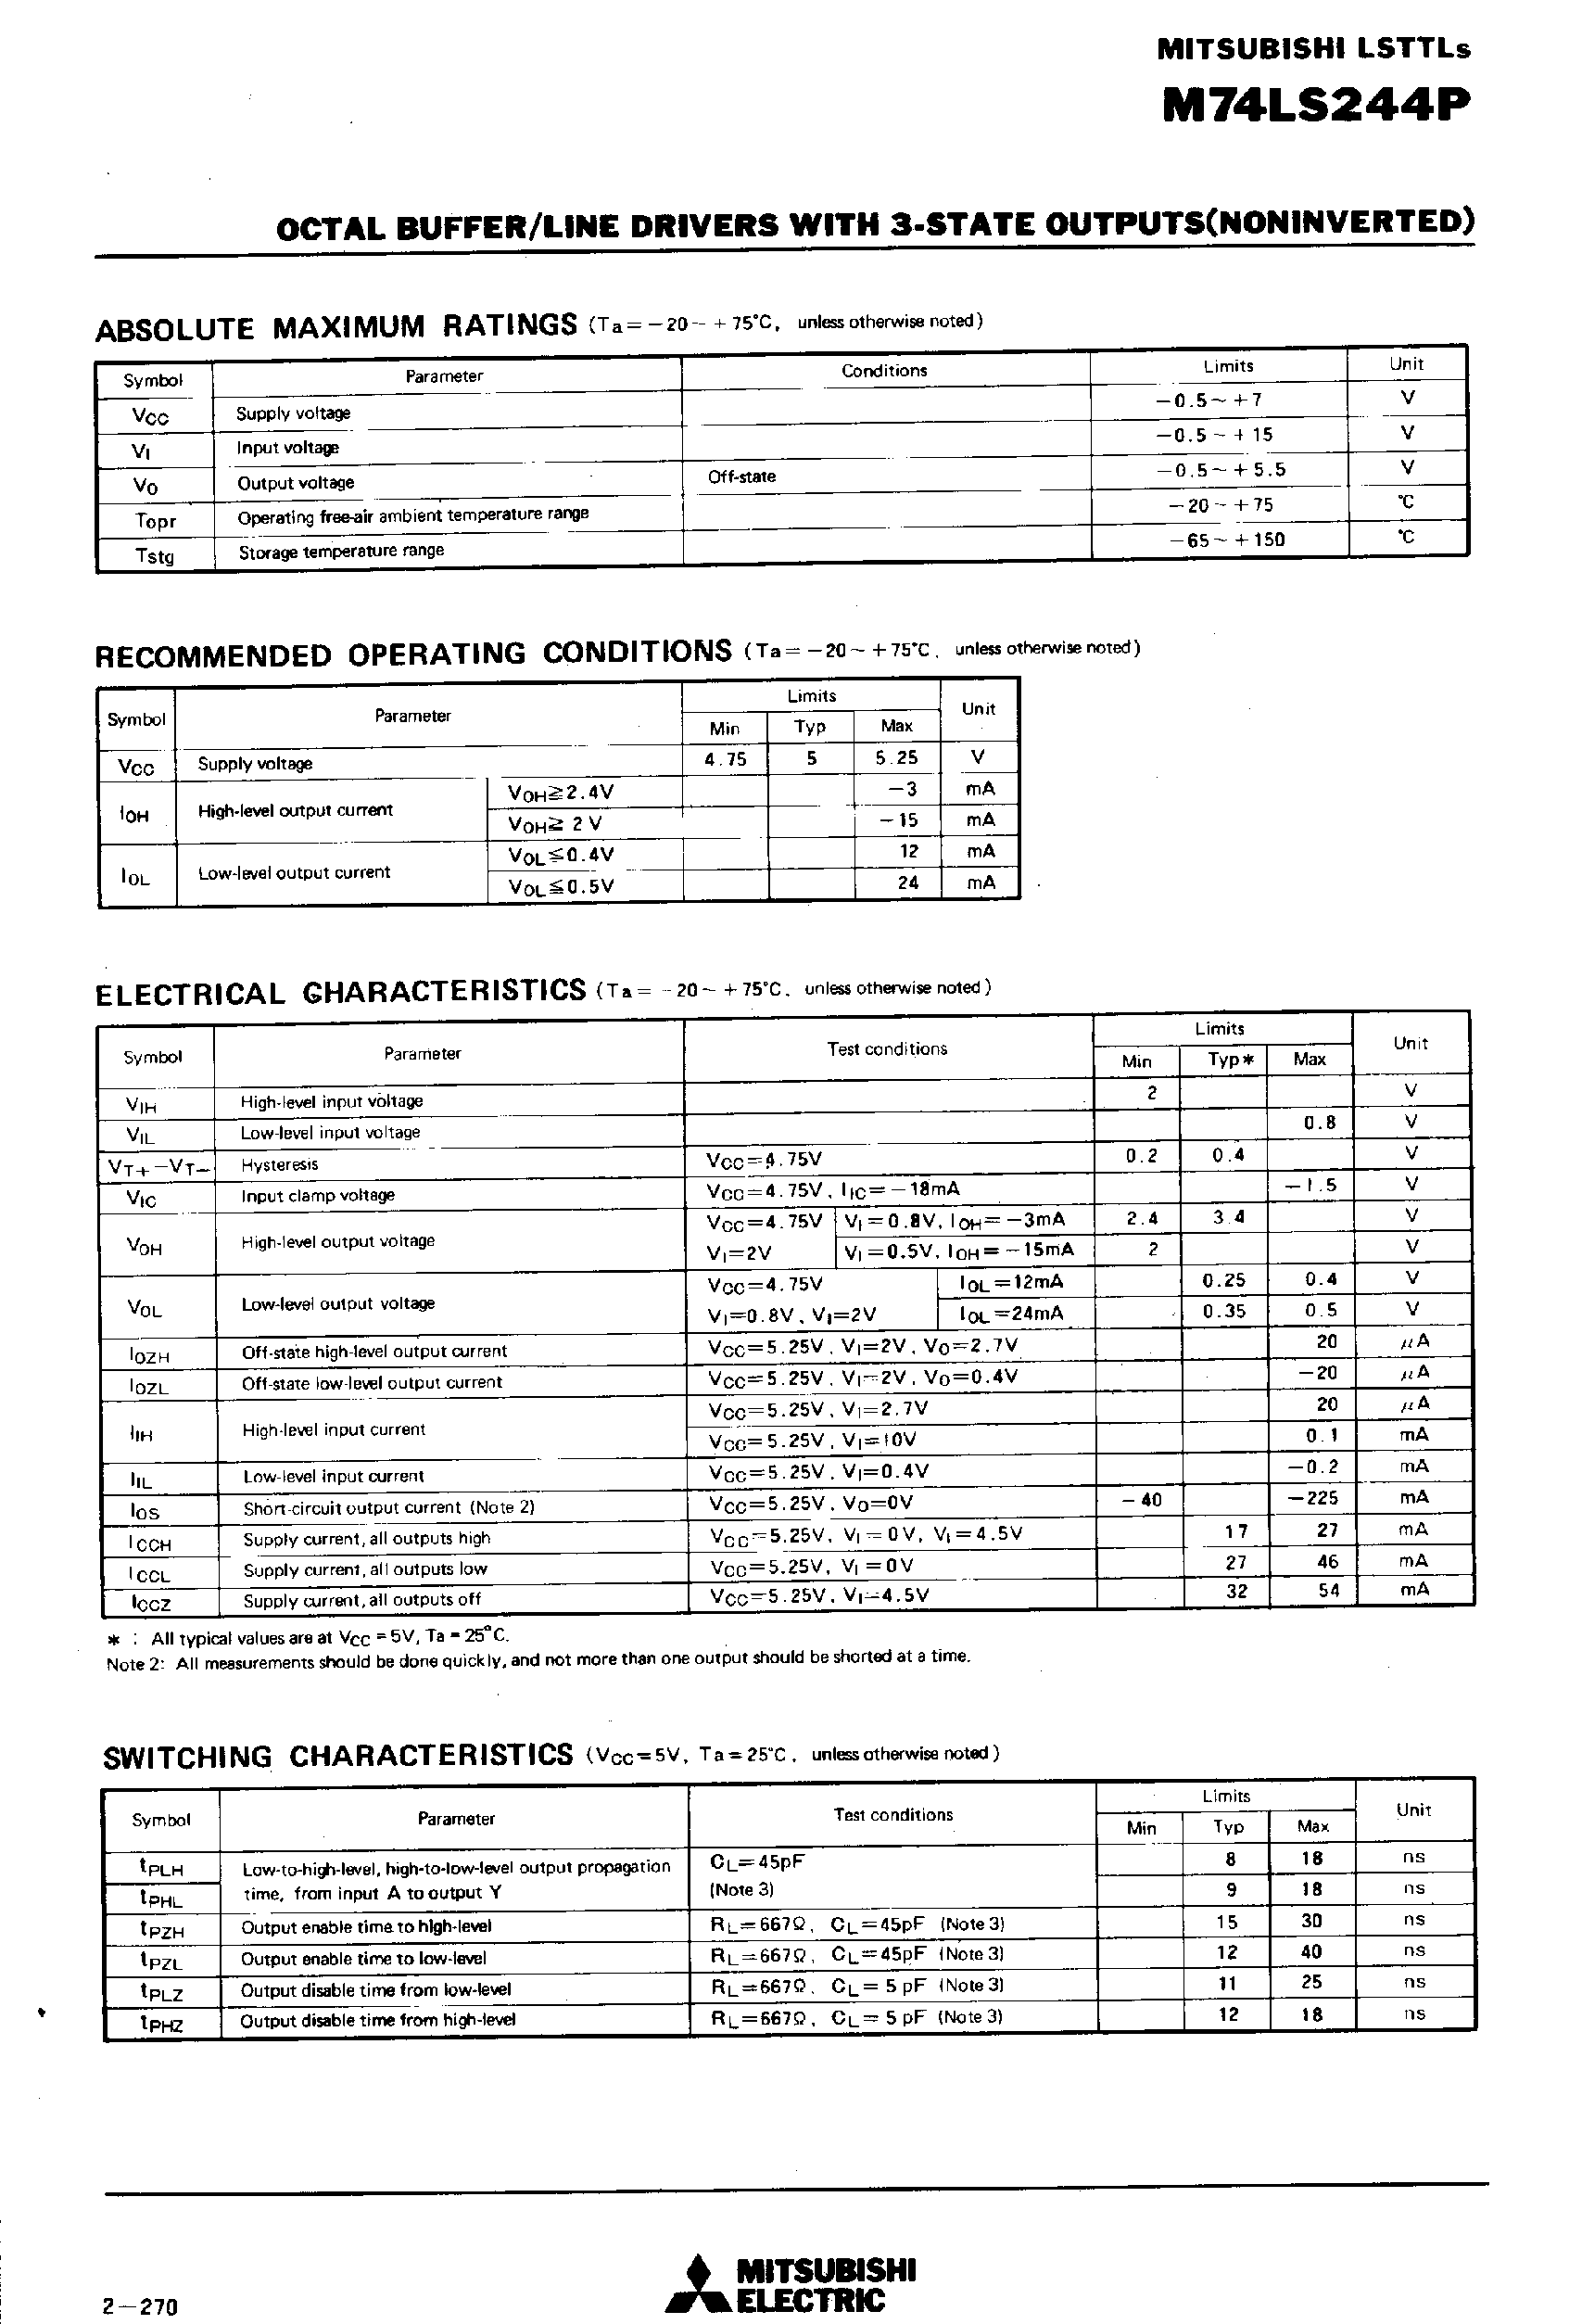 Datasheet M74LS244P - OCTAL BUFFER/LINE DRIVERS WITH 3-STATE OUTPUT(NONINVERTED) page 2